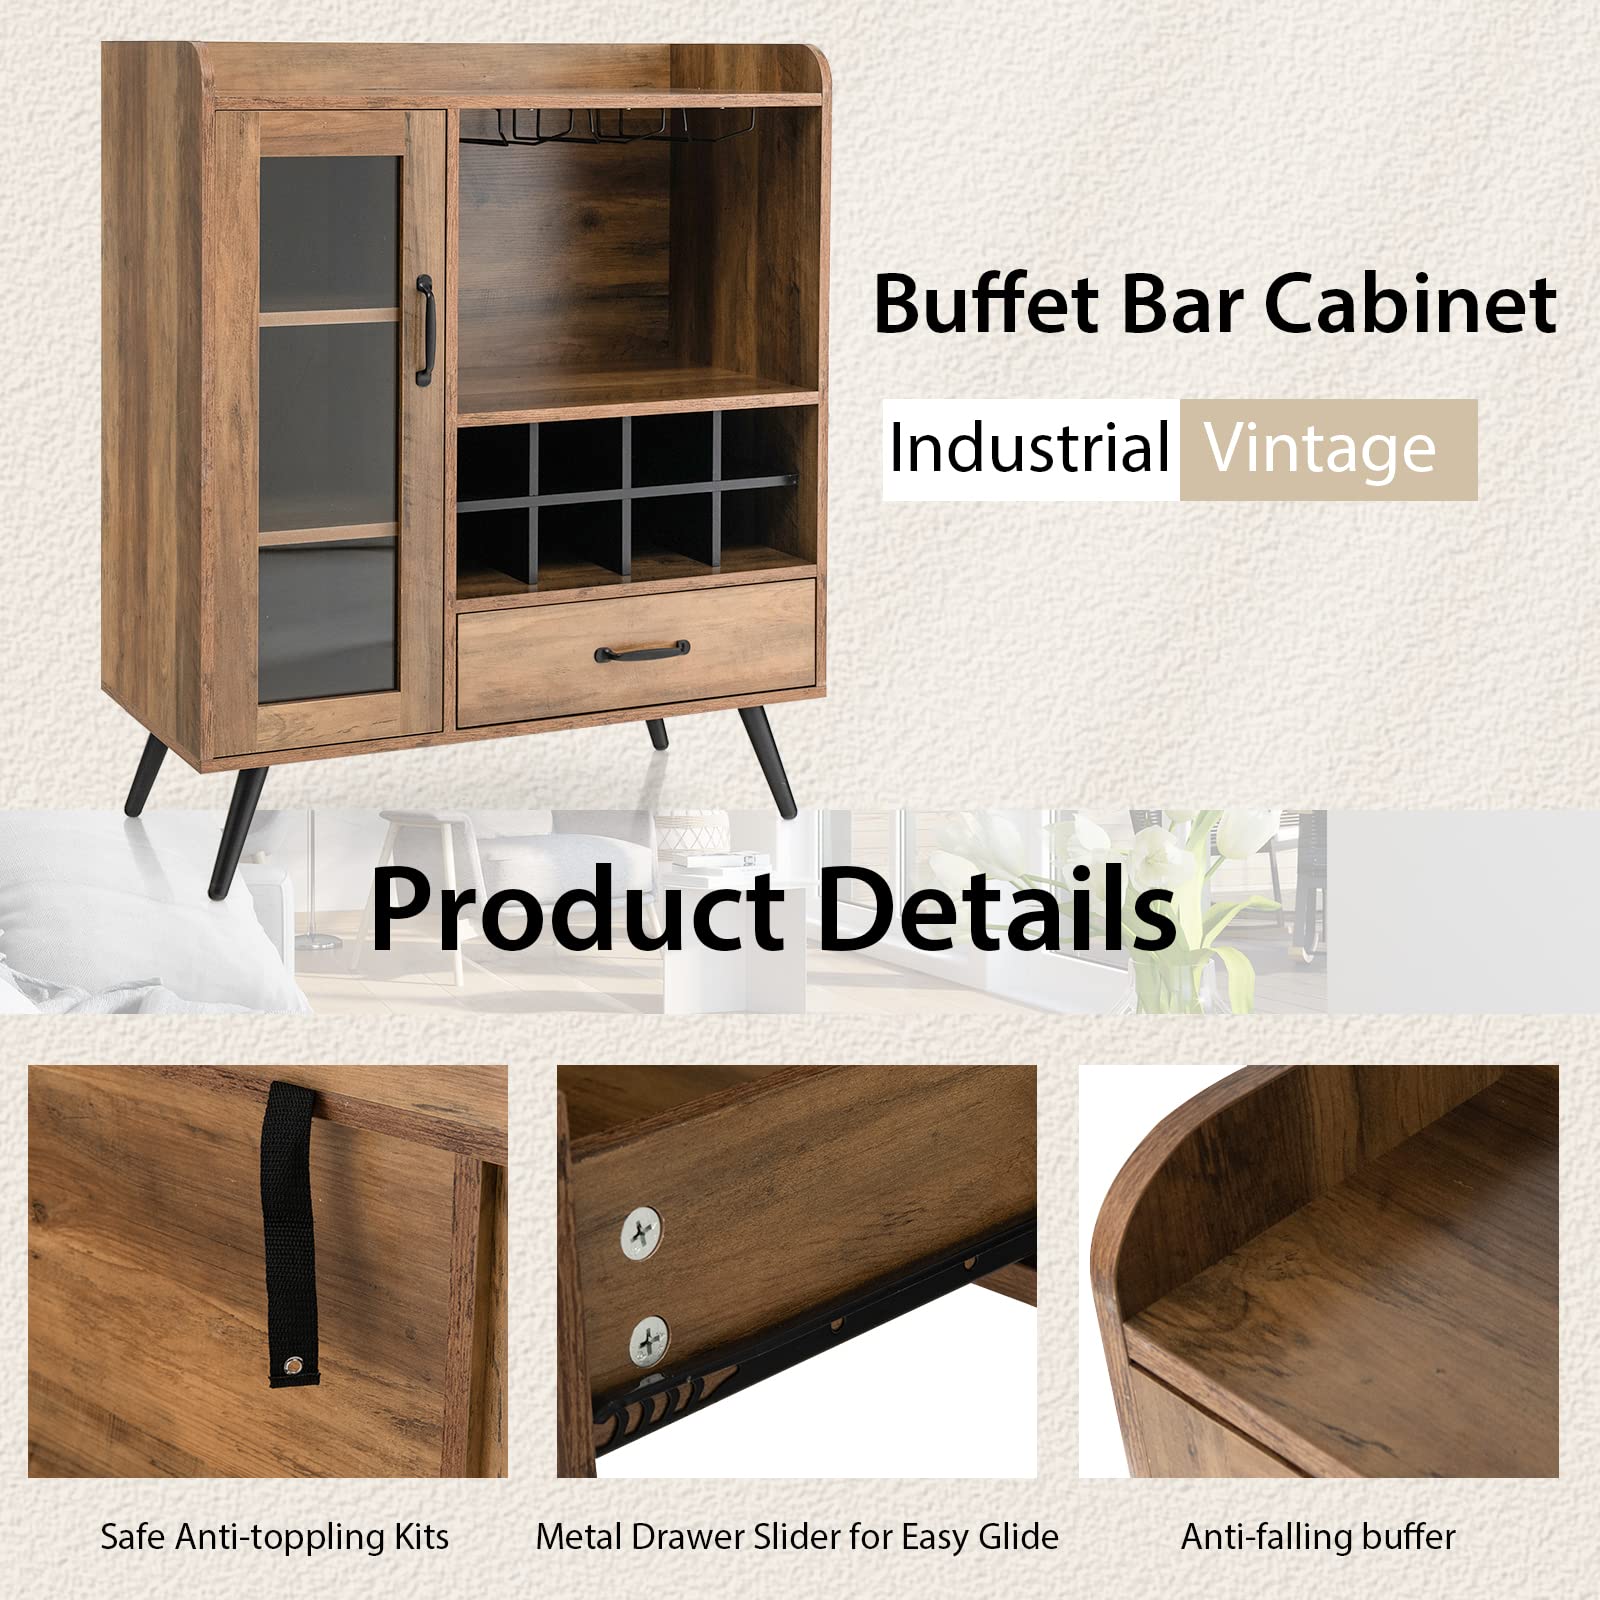 Giantex Buffet Sideboard with Drawer, Wine Cabinet for 8 Bottles, Glass Holder, 3 Tier Cupboard Tempered Glass Door (Rustic Brown & Black)